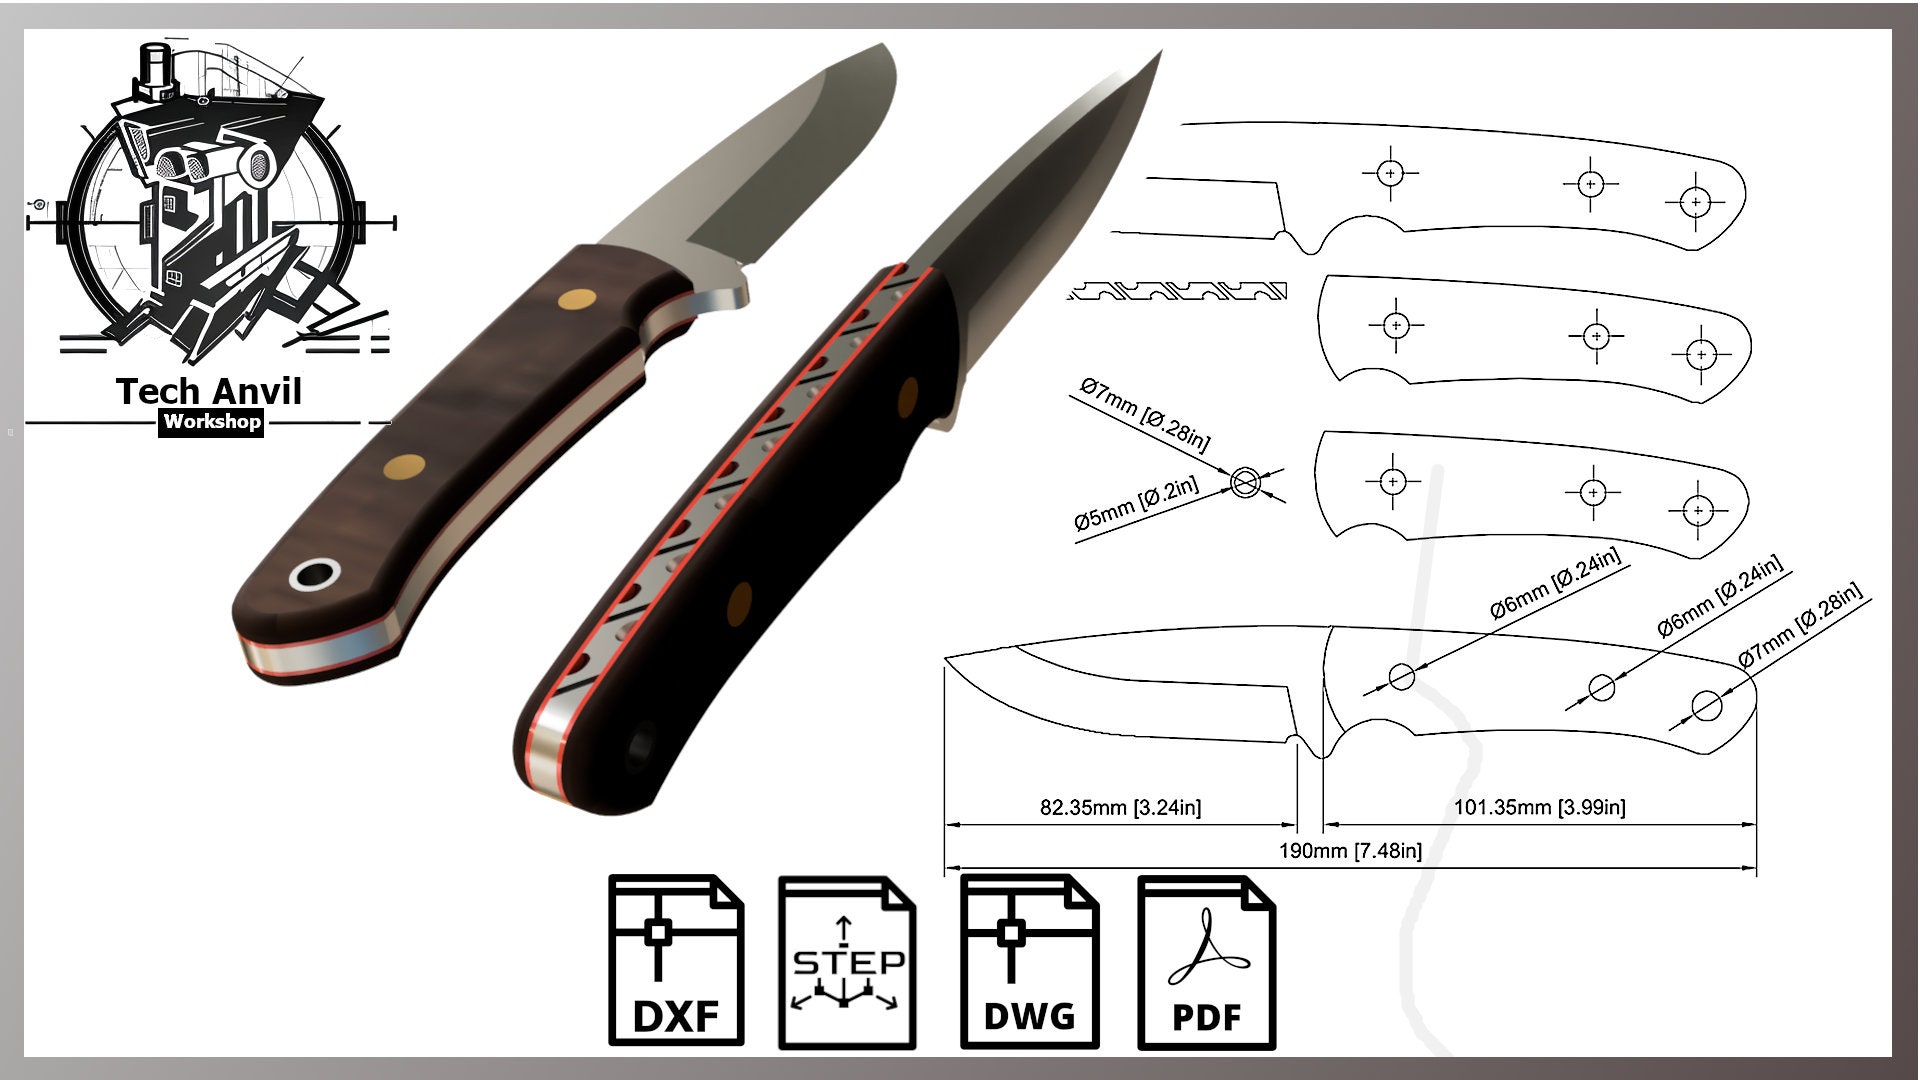 Knife Cut Guide: Dimensions, Names, & How To Video Demo